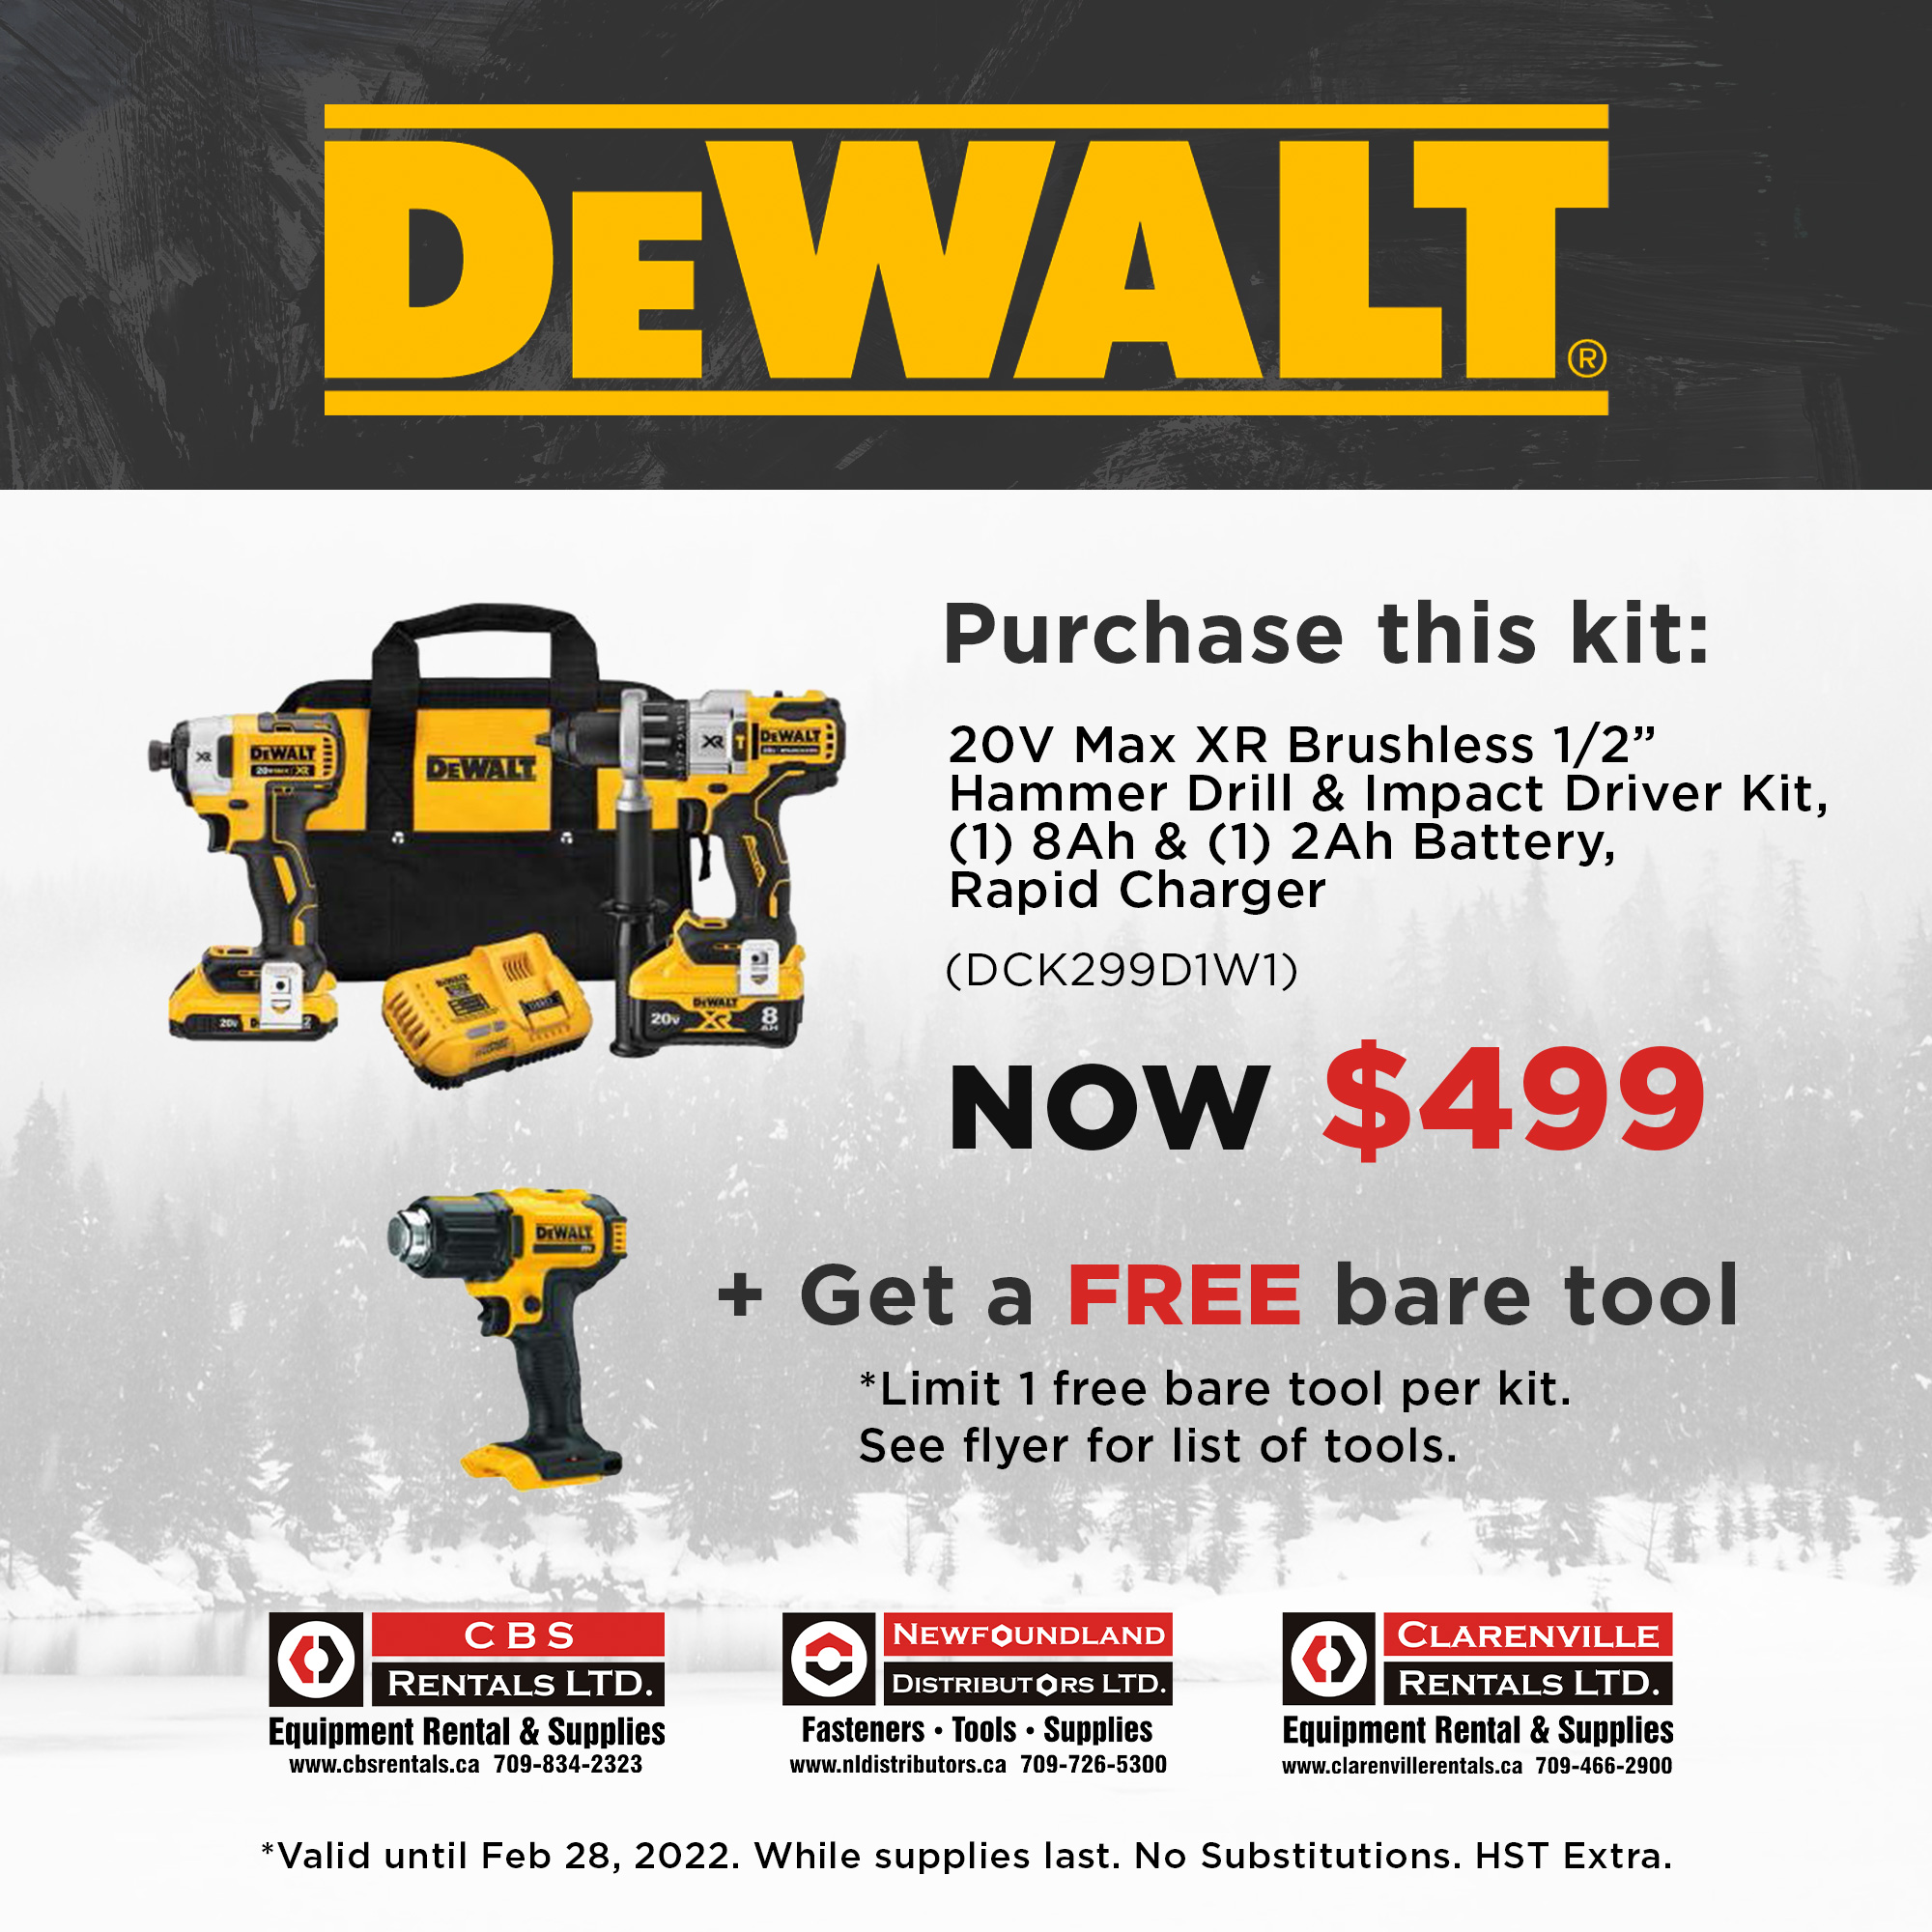 nedsænket Okklusion Addition NL Distributors Group of Companies on Twitter: "Get a FREE bare tool when  you purchase a #DeWalt DCK299D1W1 20V Max XR Brushless 1/2” Hammer Drill  &amp; Impact Driver kit! ⚡️ Now $499 +